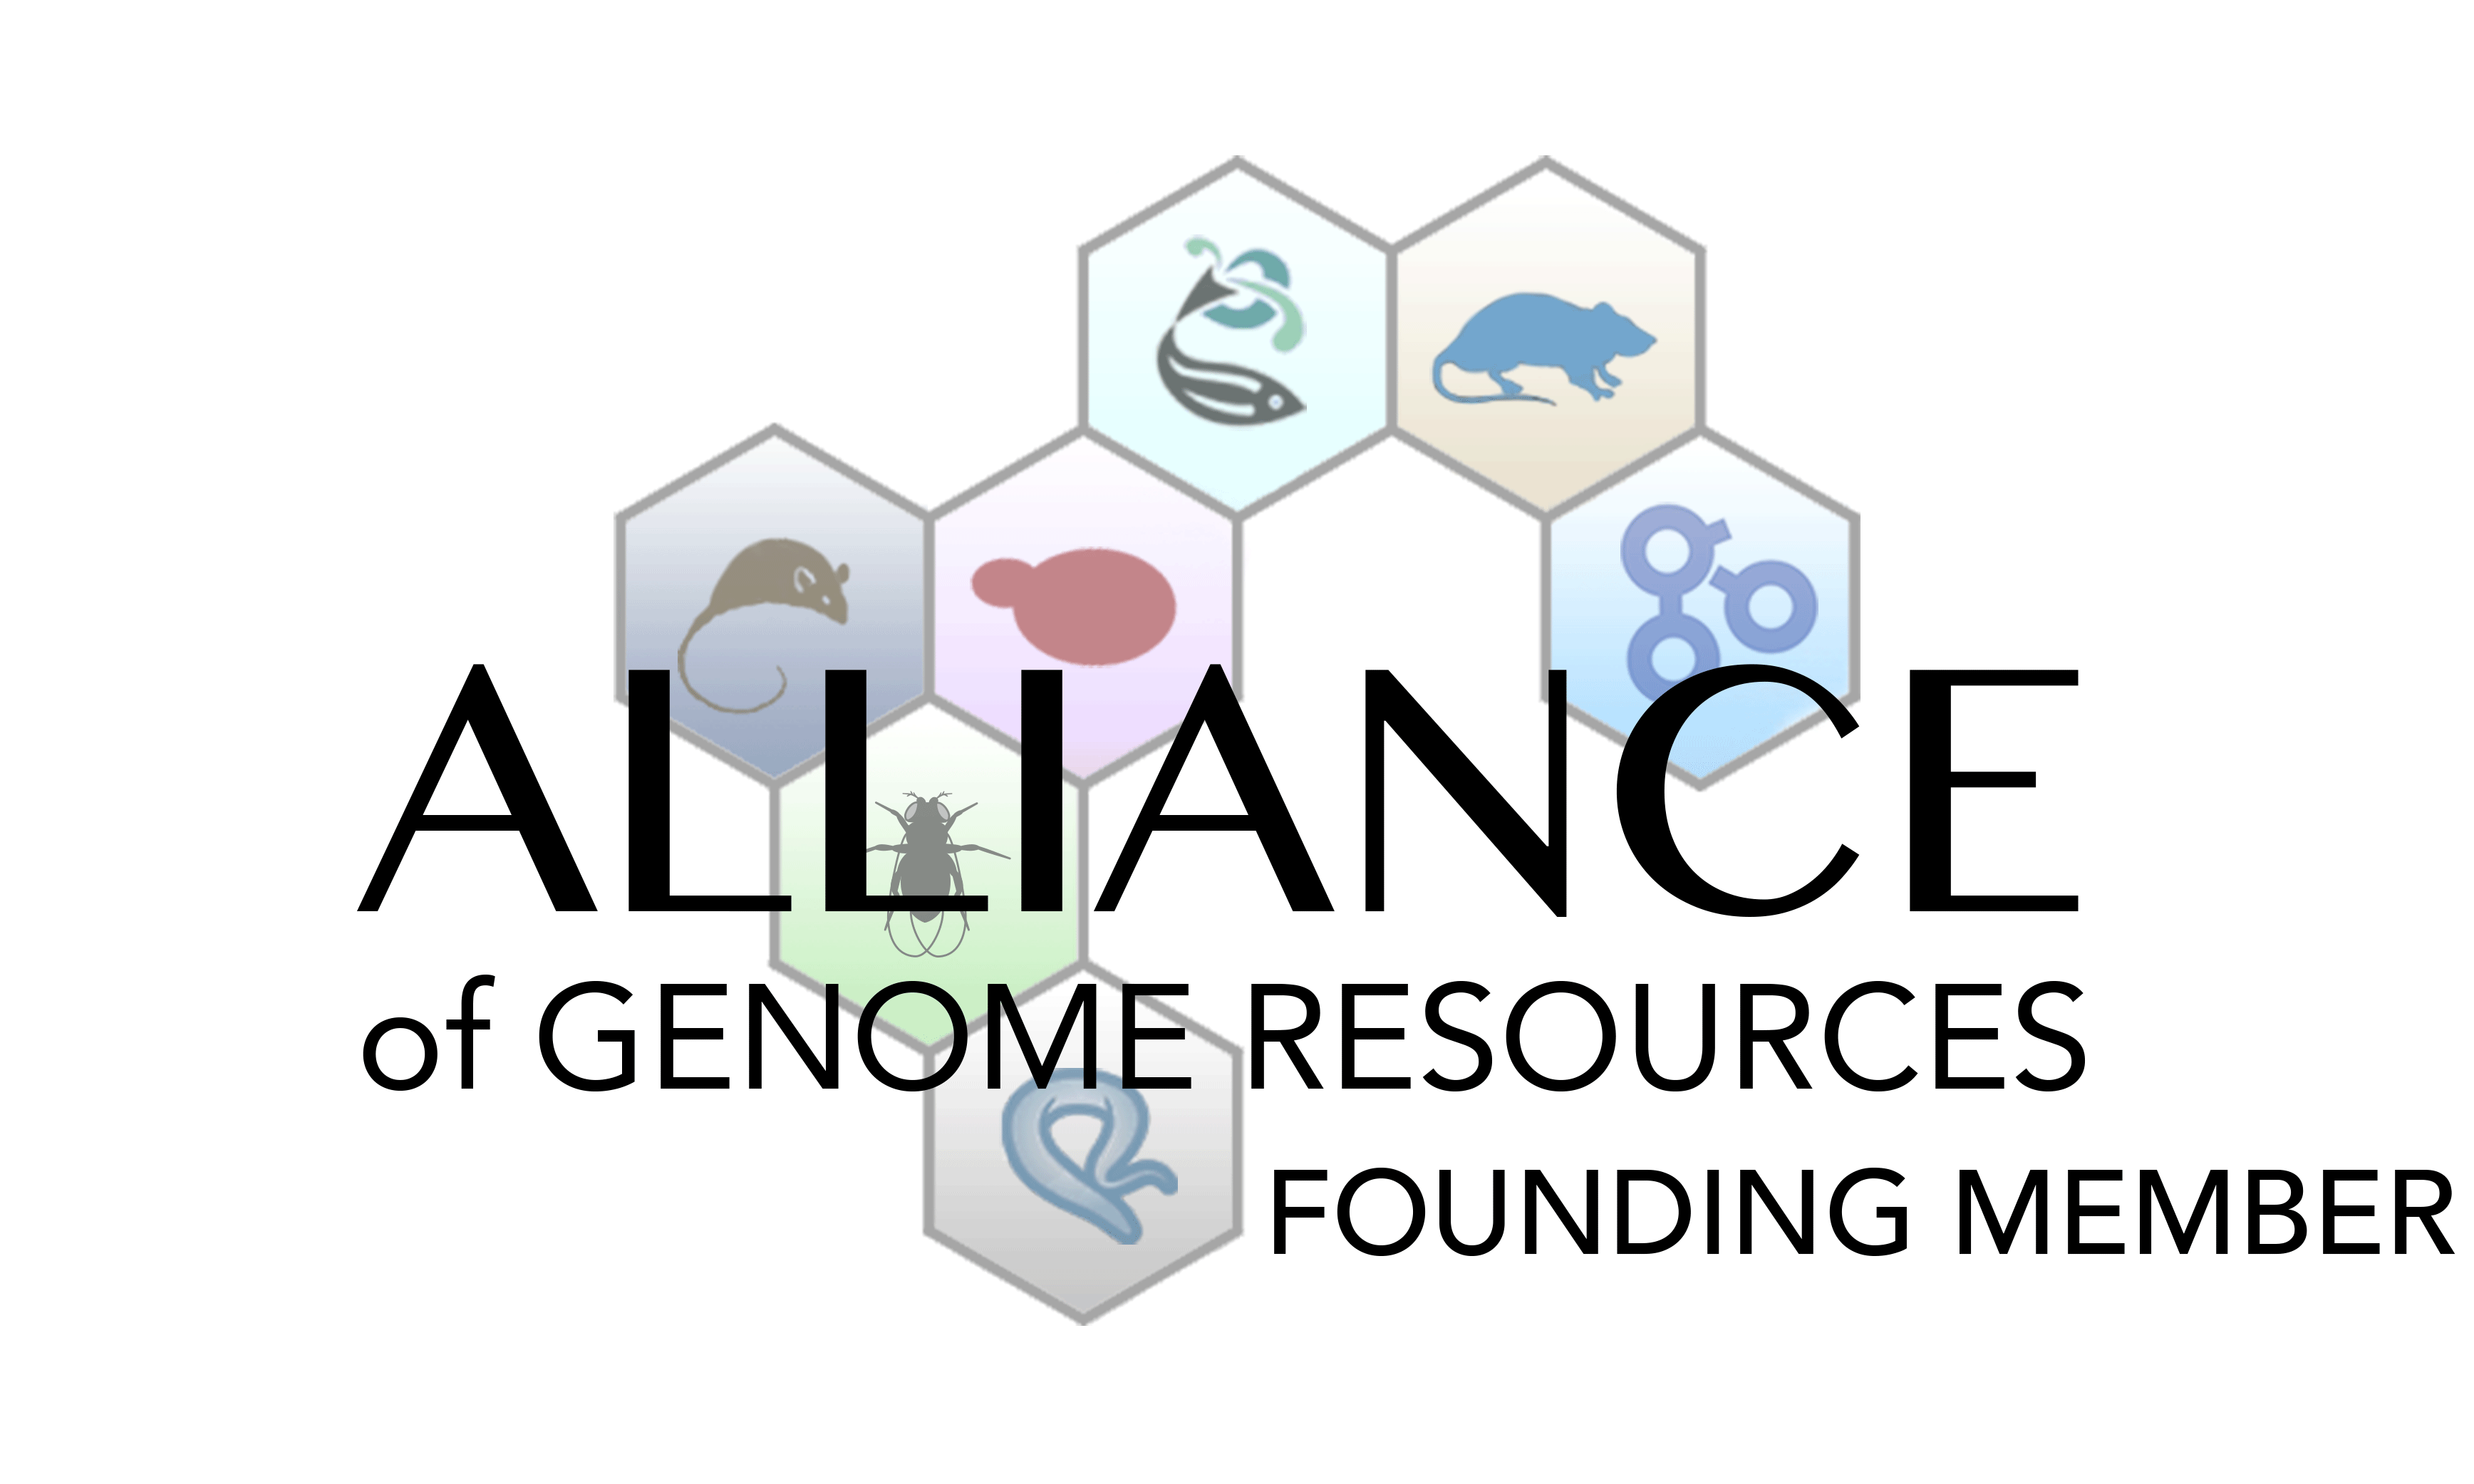 Alliance of Genome Resources